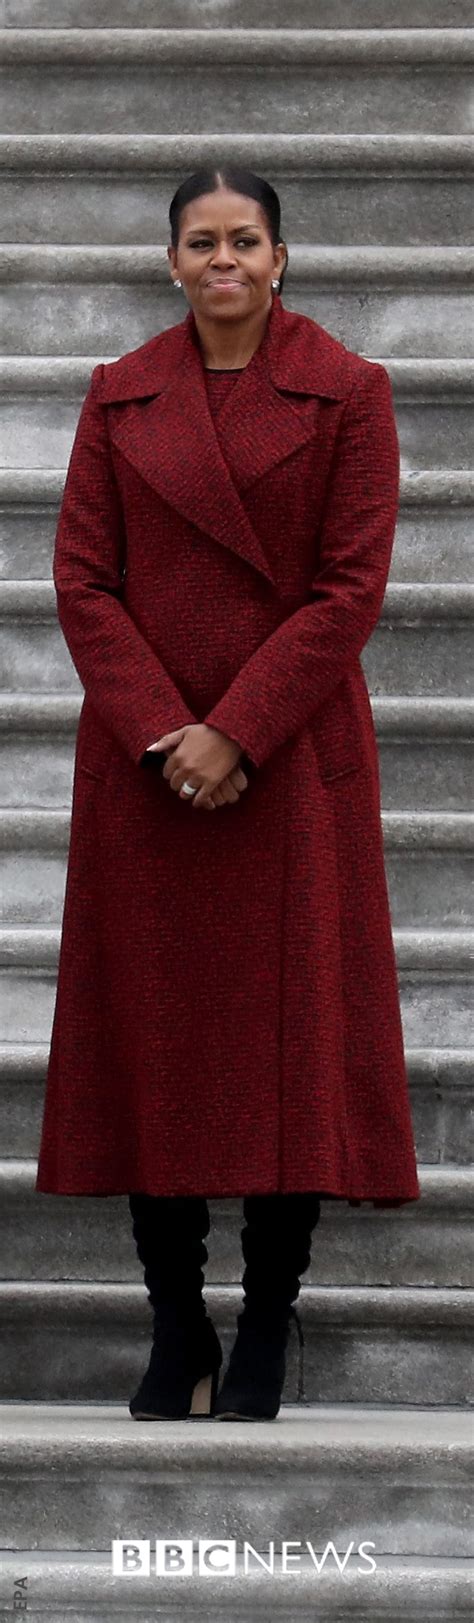 Michelle Obama Wears A Striking Burgundy Coat And Boots As She Stands